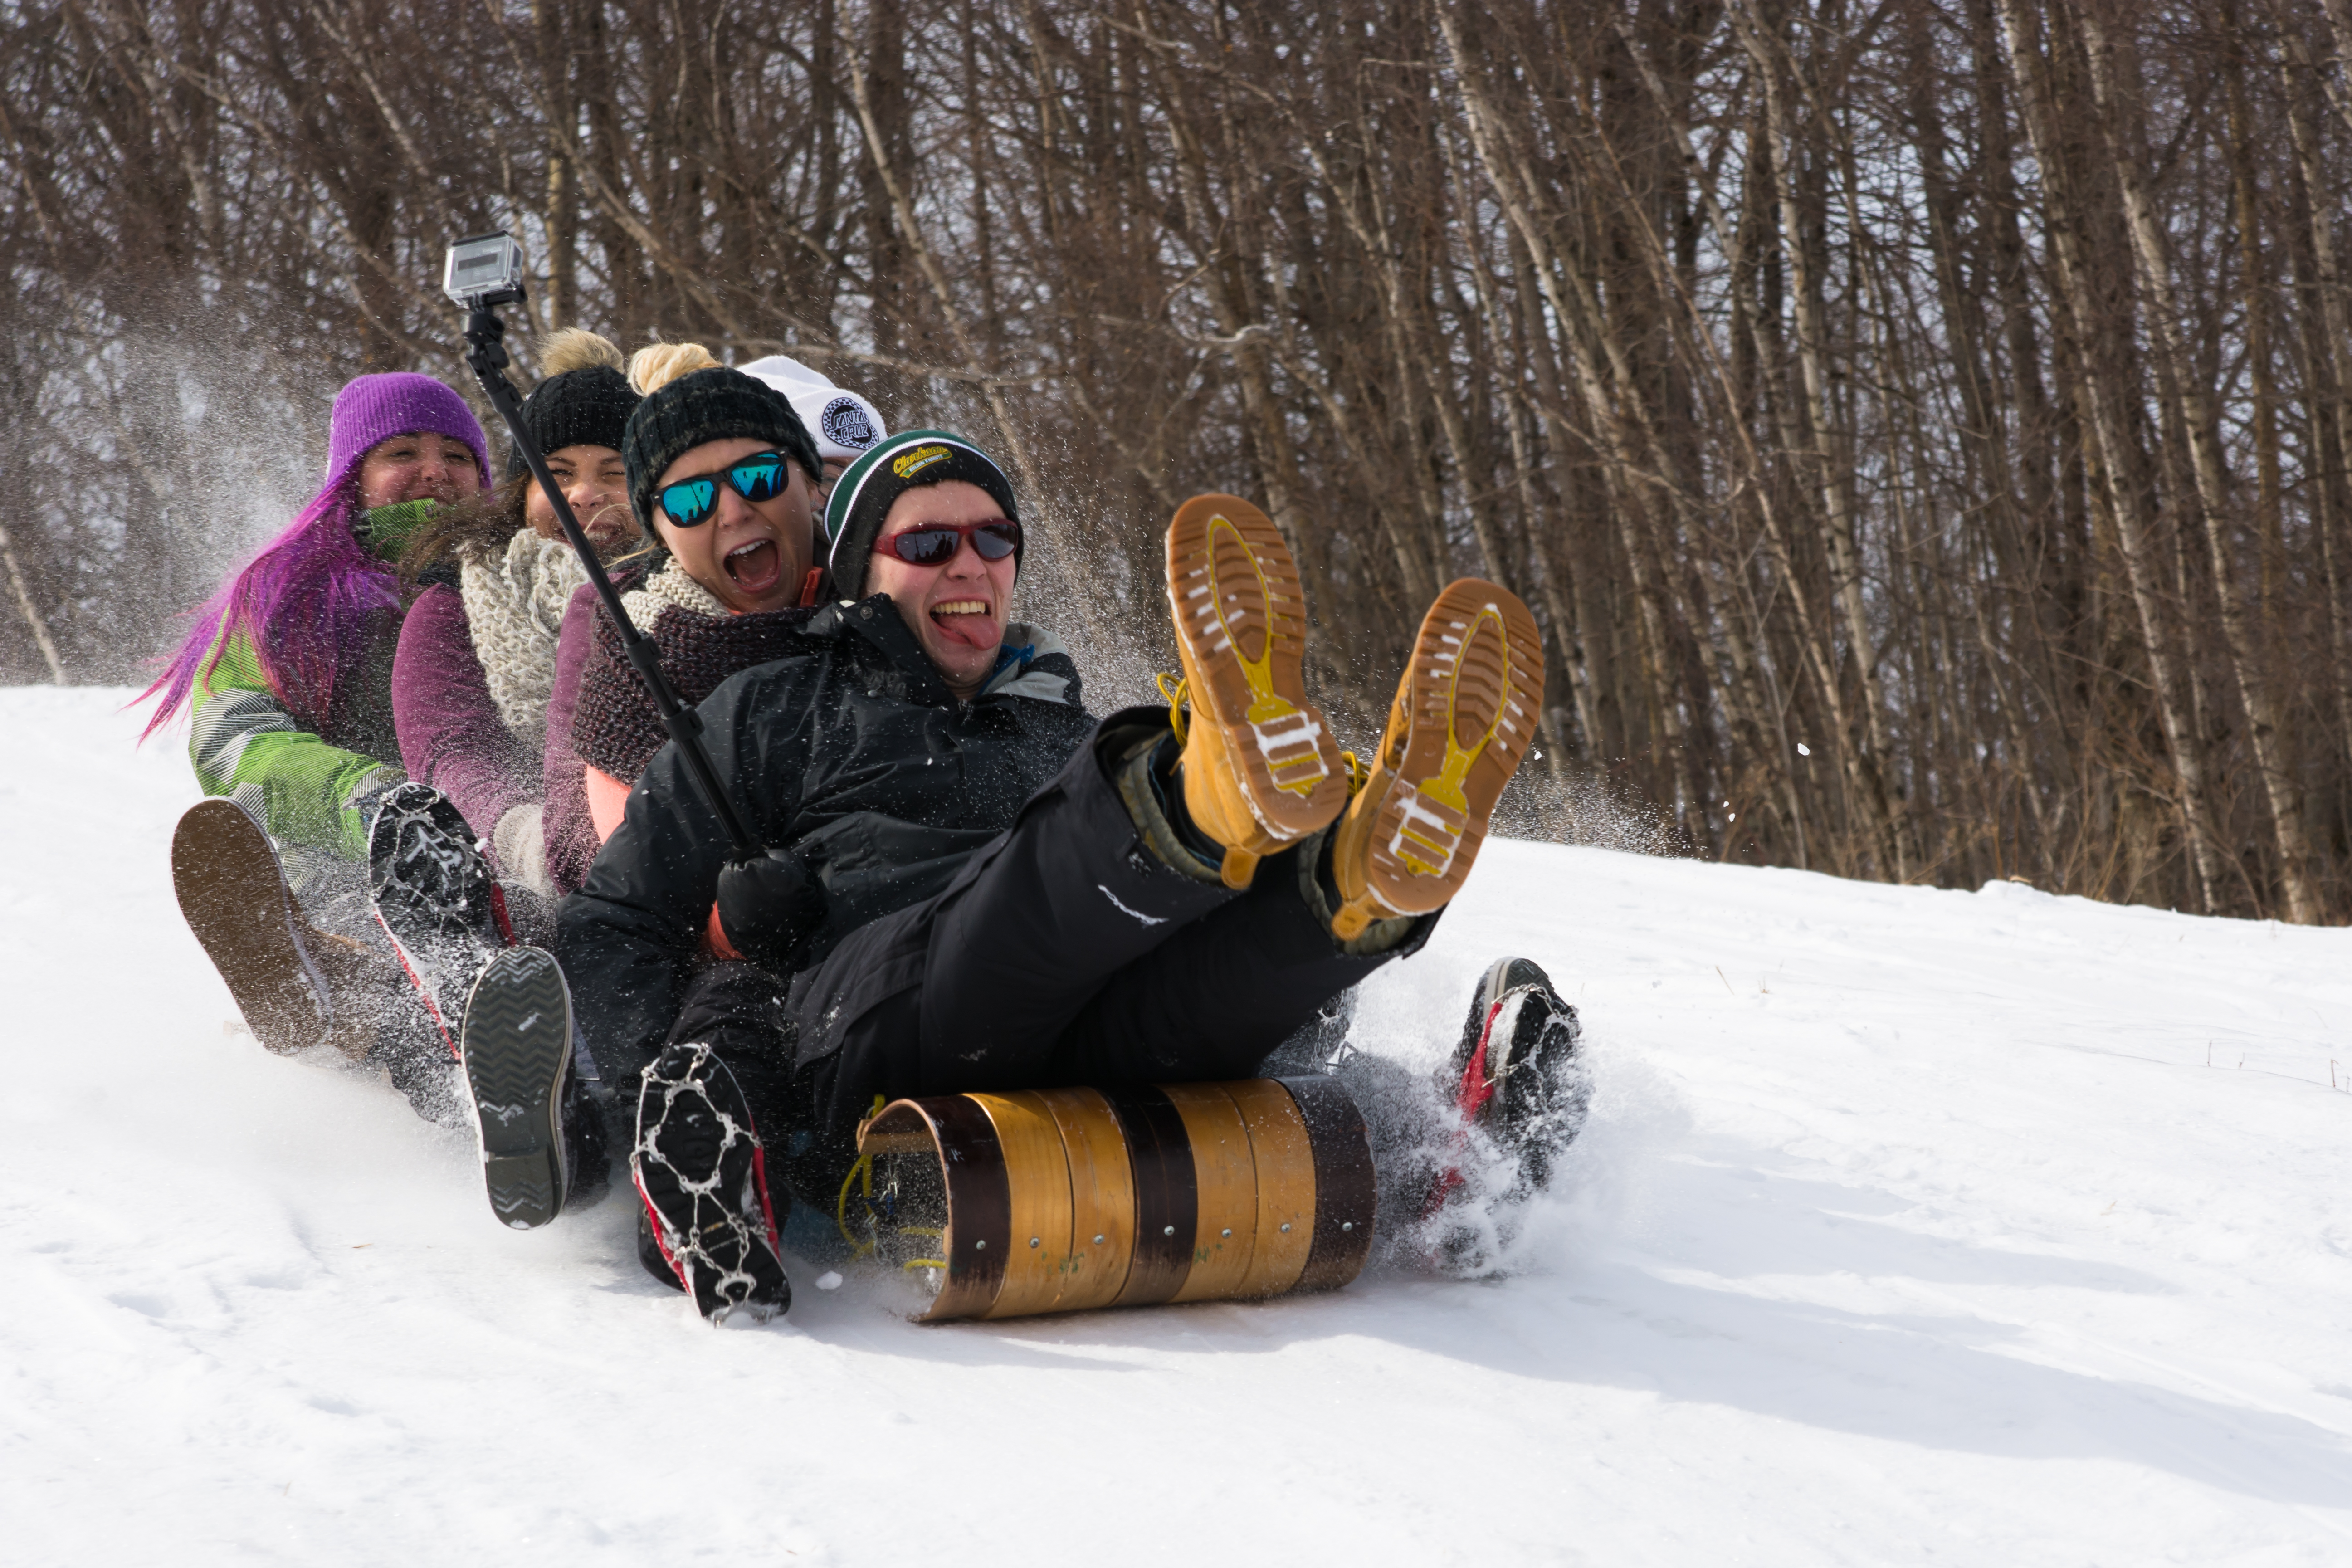 A group of student sledding down the hill on a wooden sled